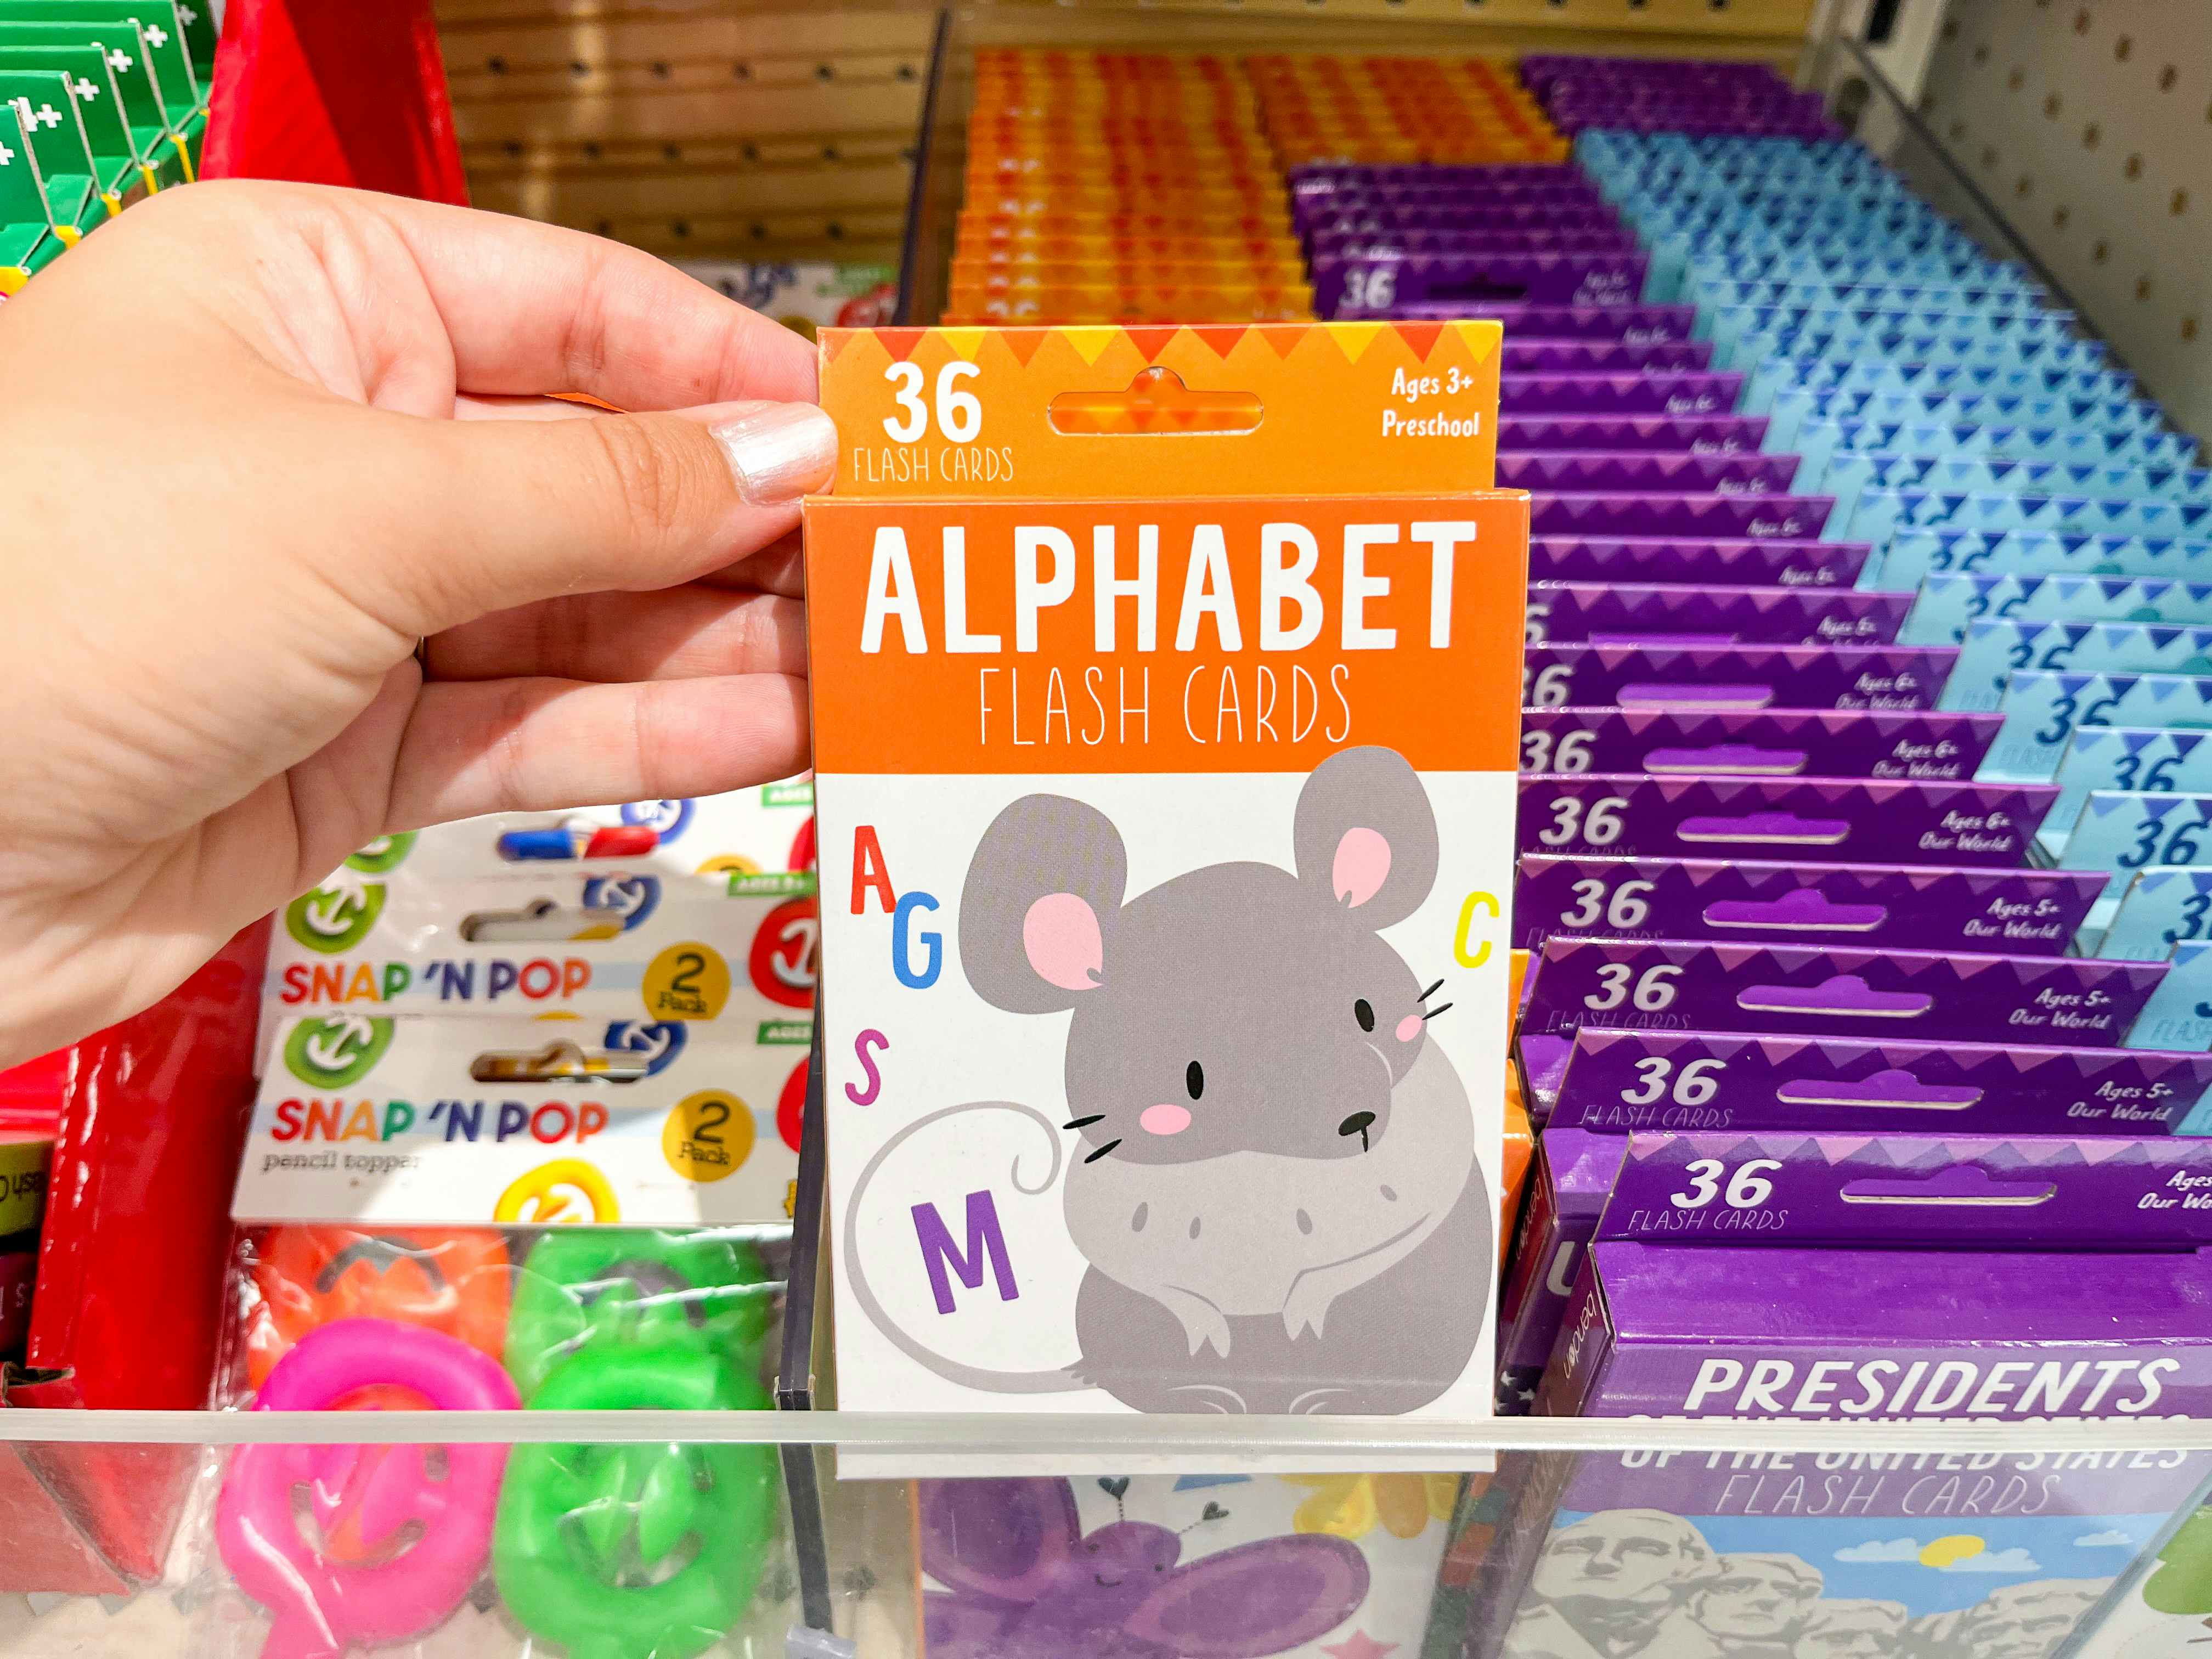 A woman's hand holding up a 36-pack of Alphabet flashcards at Target